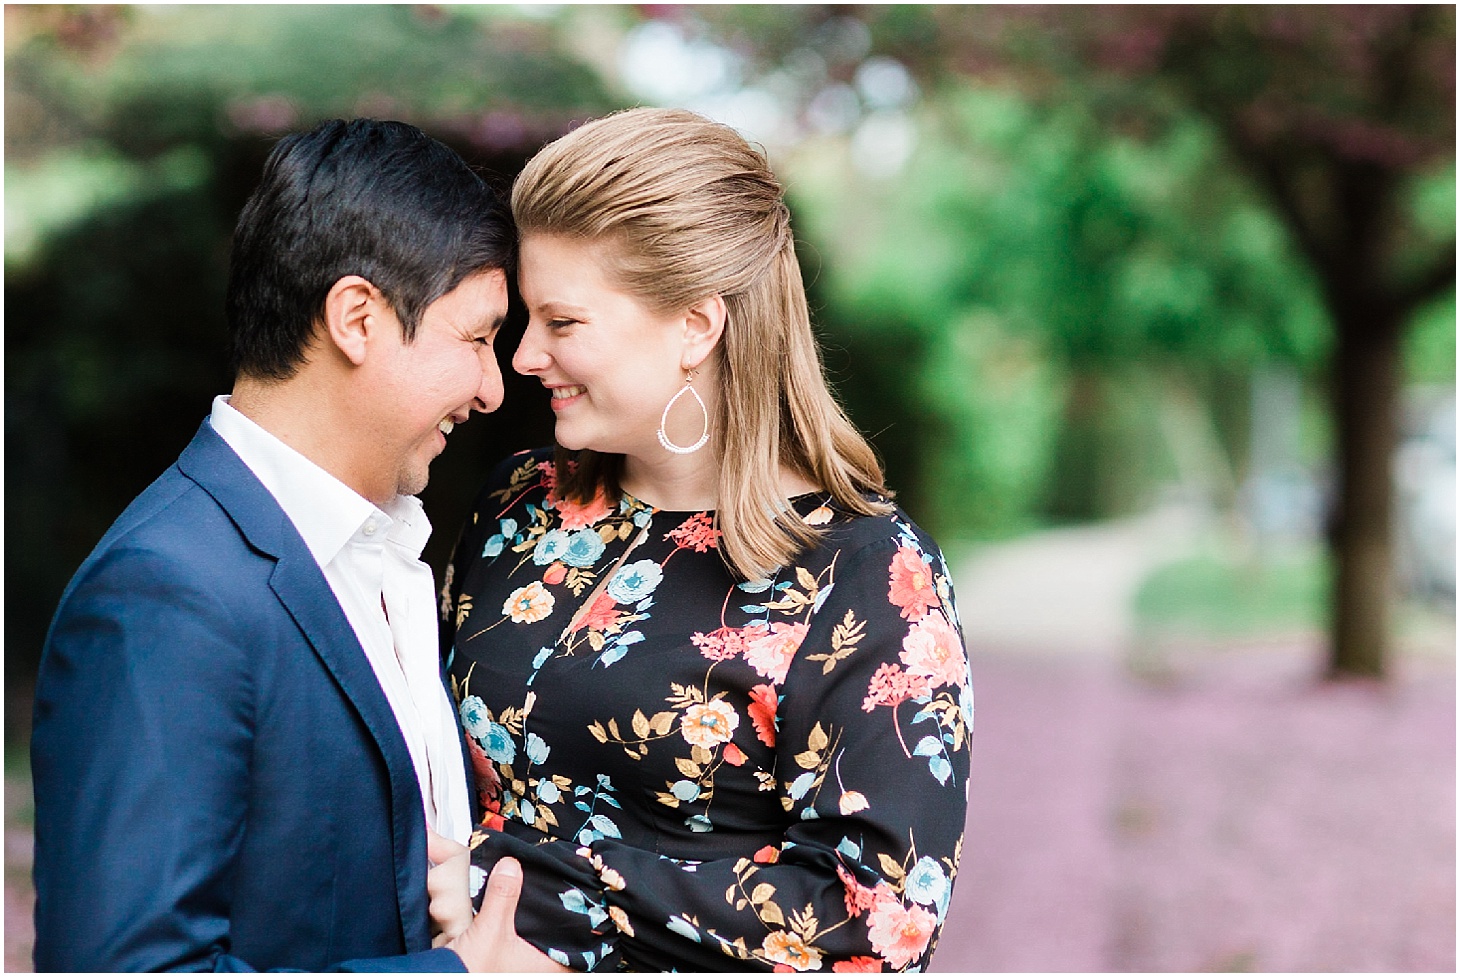 Engagement Portraits with Cherry Blossoms in NYC, Springtime Engagement in Queens NYC, Sarah Bradshaw Photography